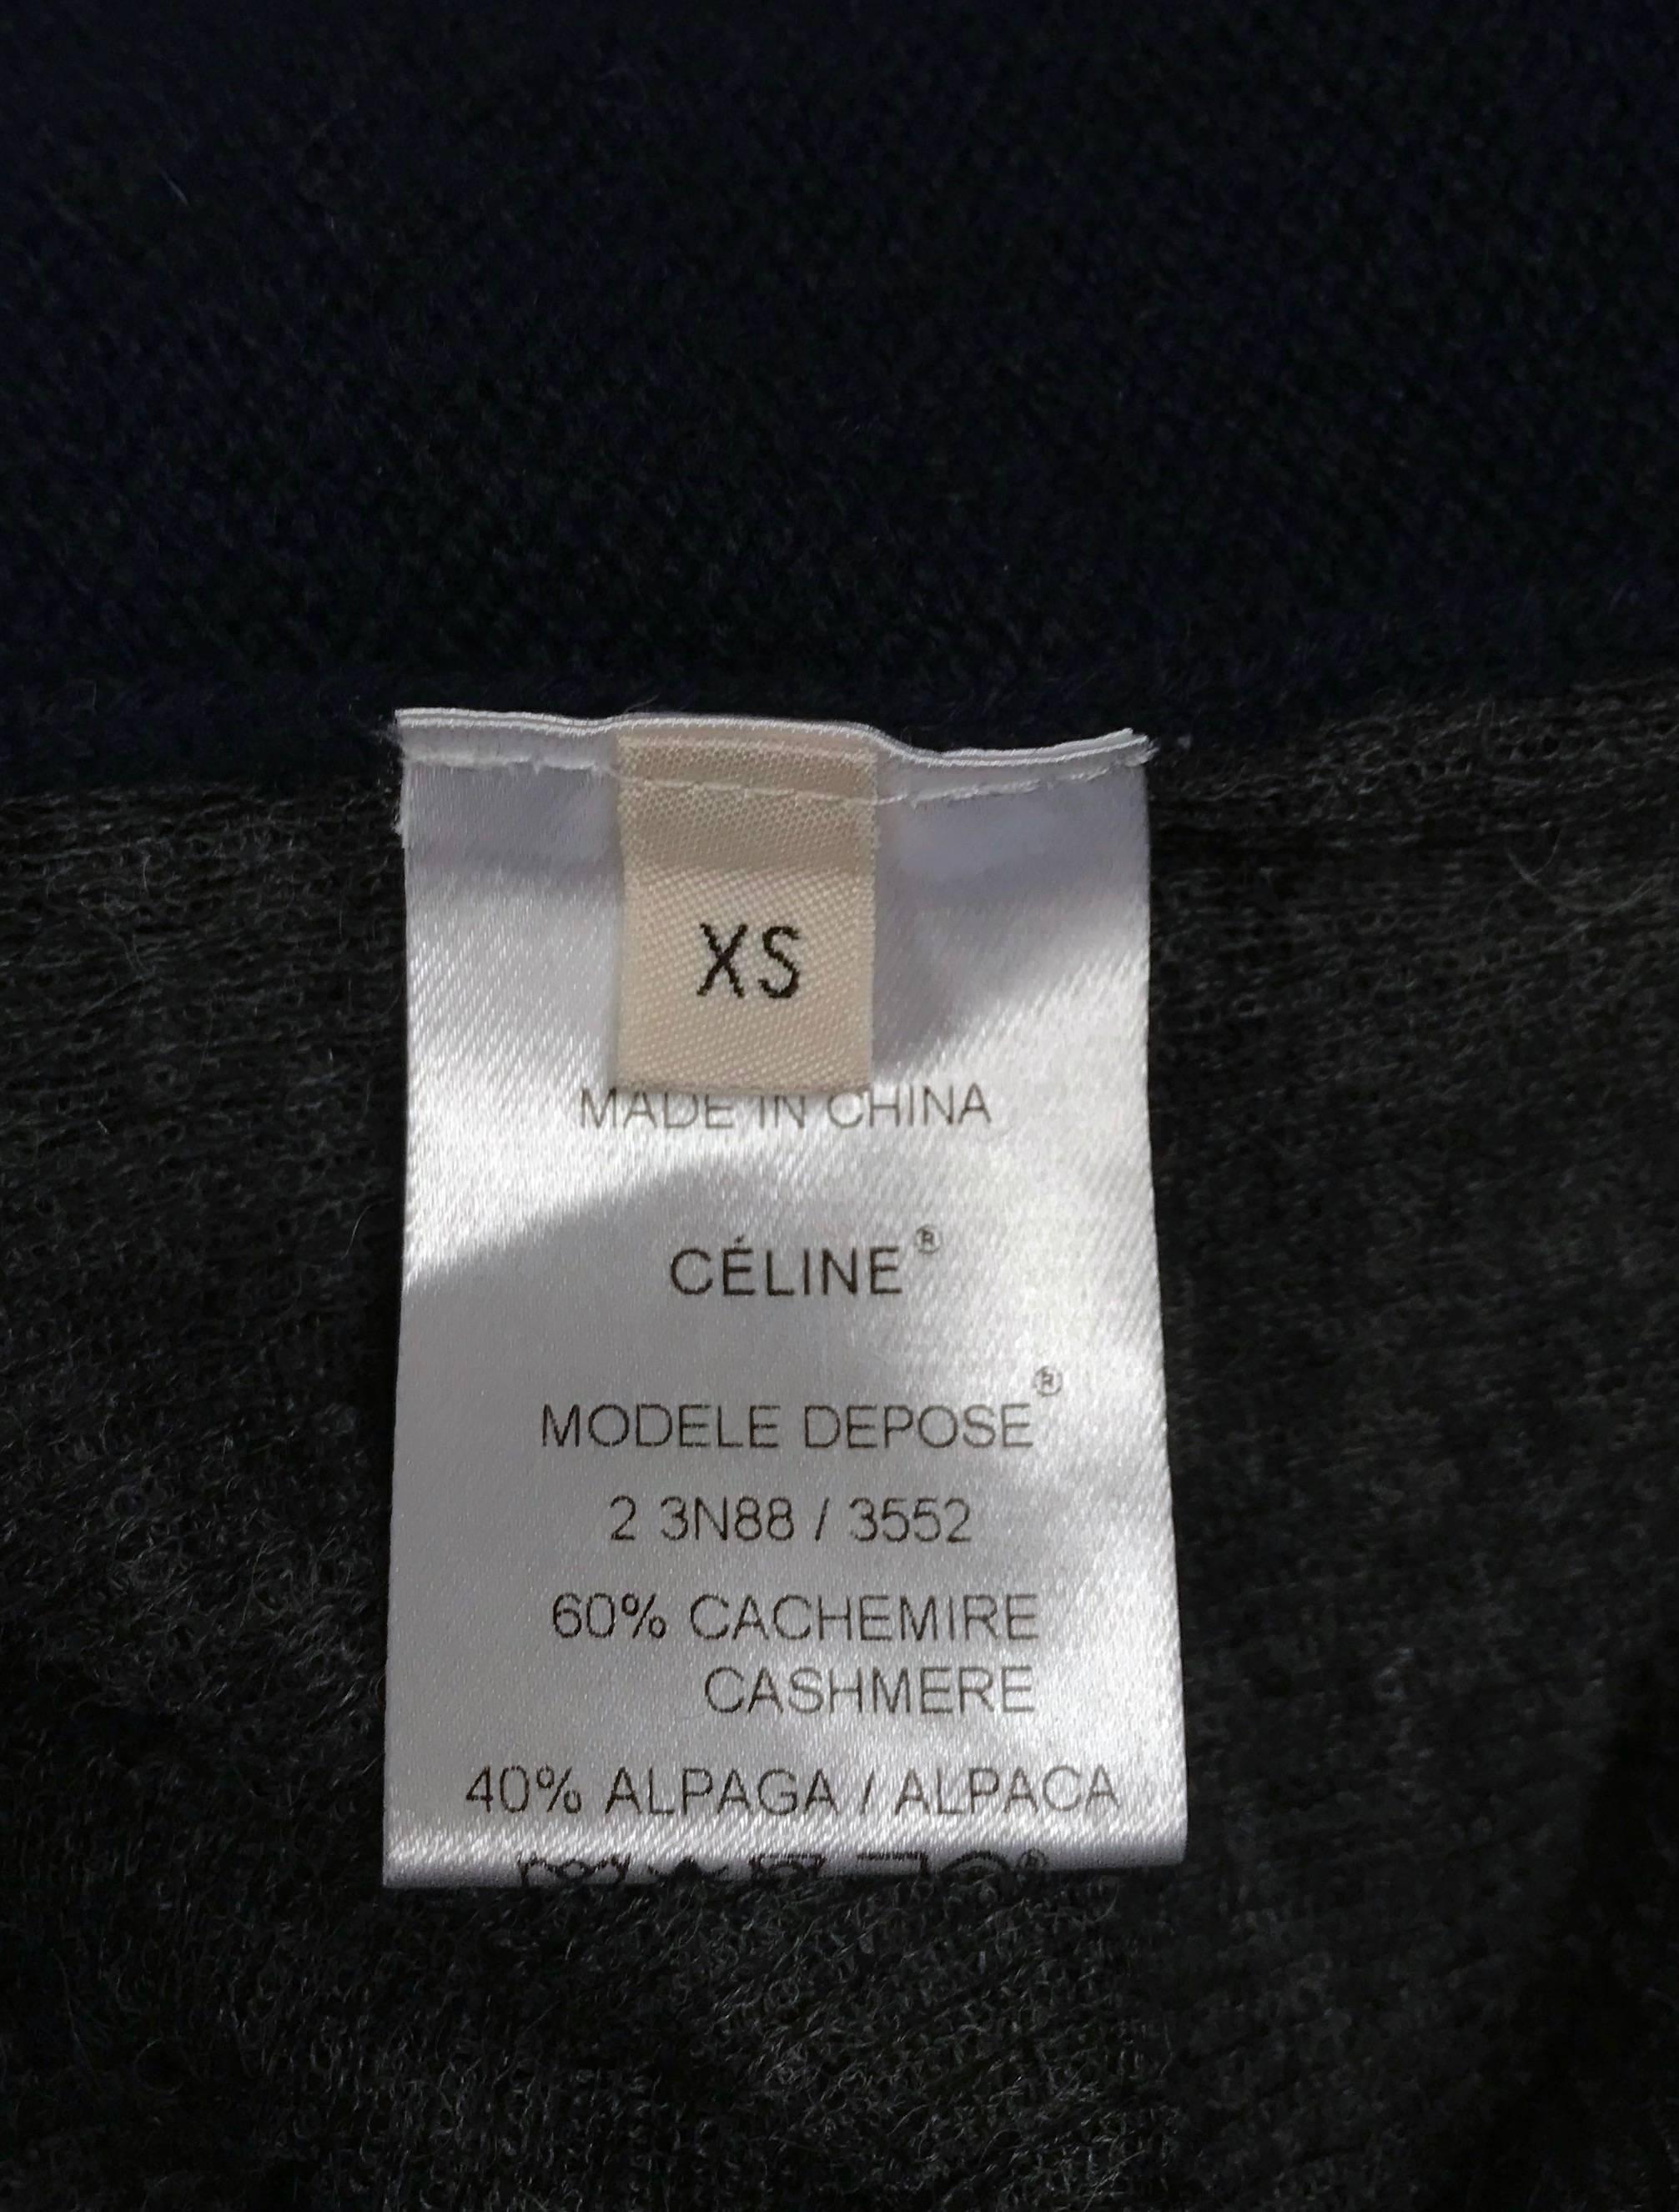 CELINE by PHOEBE PHILO navy and grey cashmere and alpaca sheer sweater 1